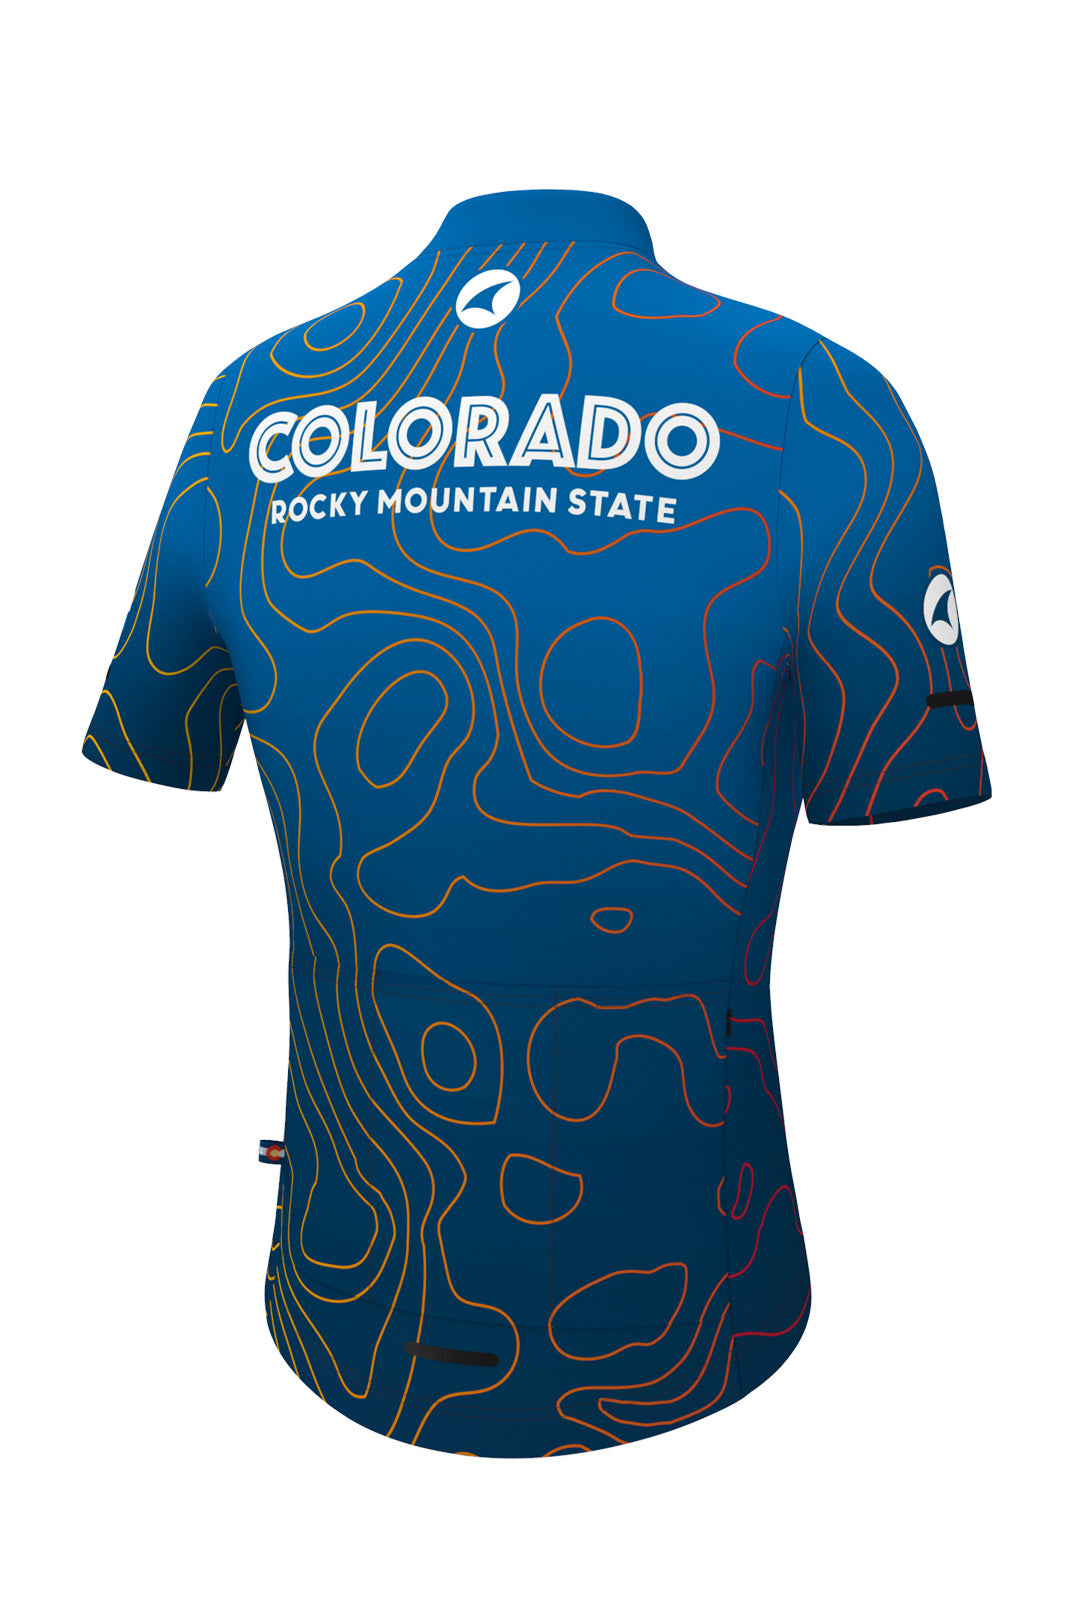 Women's Loose Fit Colorado Cycling Jersey - Dusk Ombre Back View 